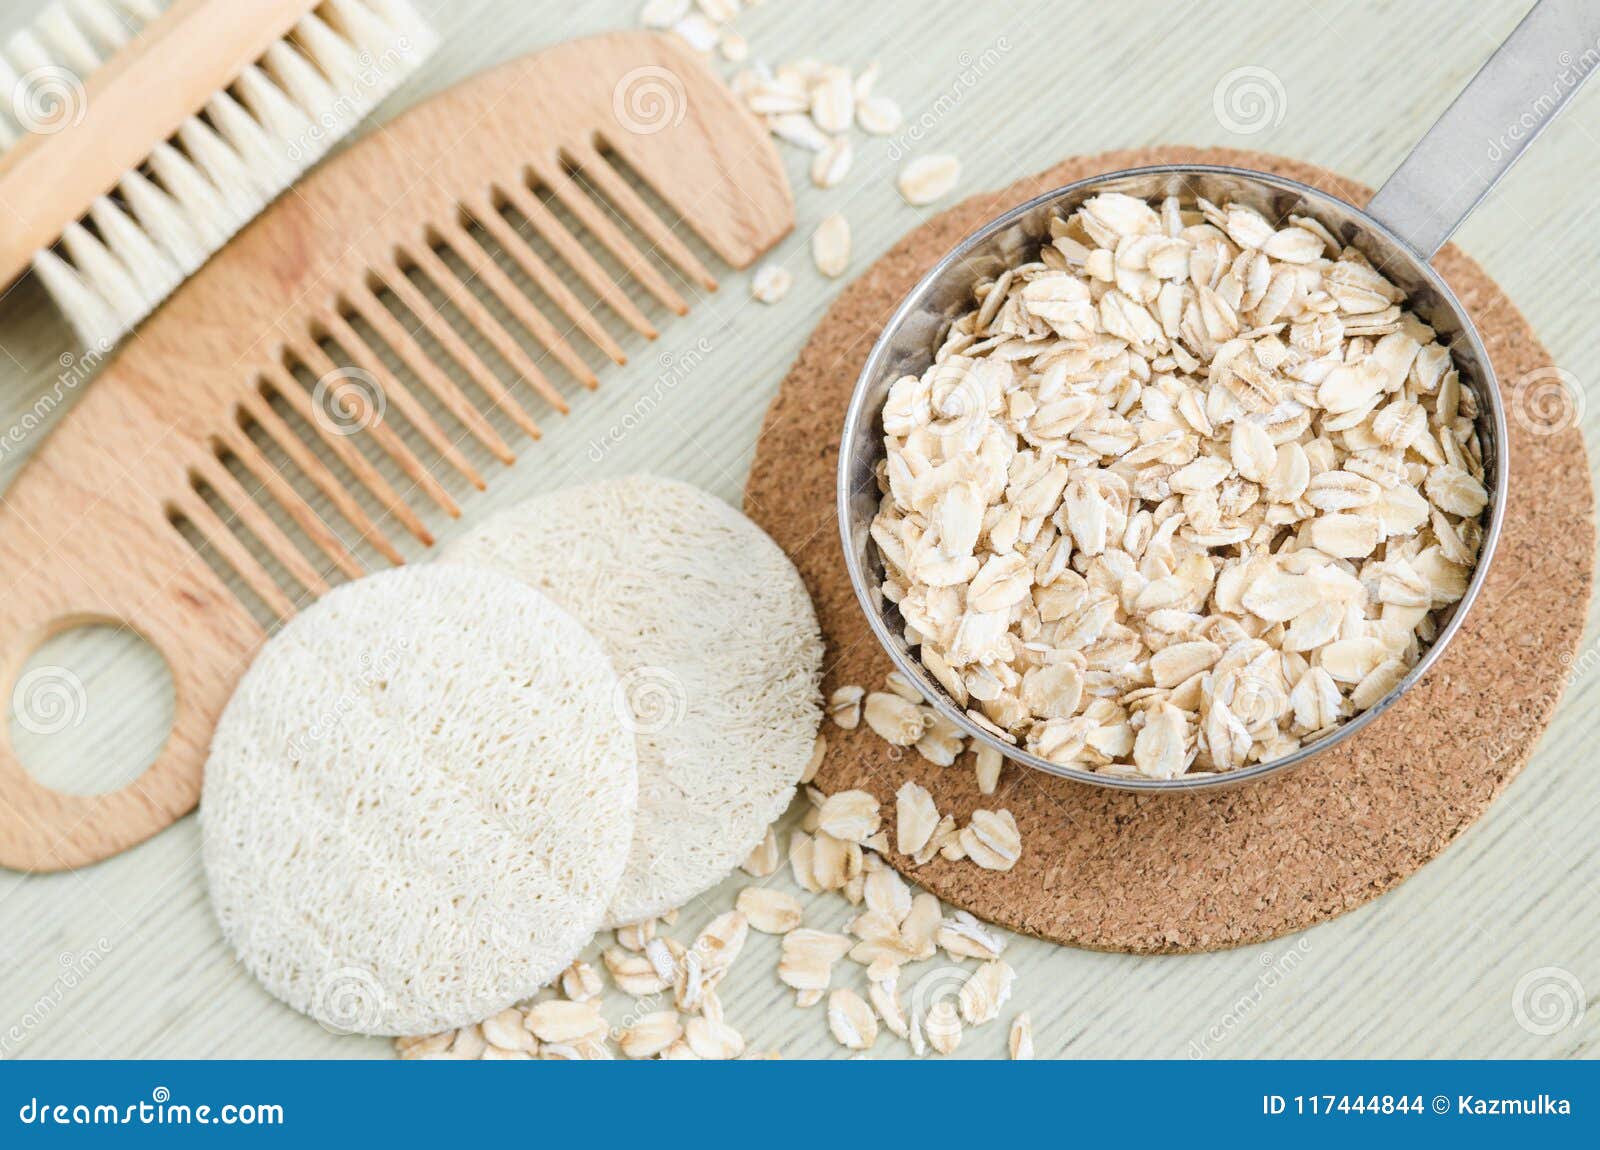 Rolled Oats In A Small Bowl For Preparing Homemade Facial Mask 